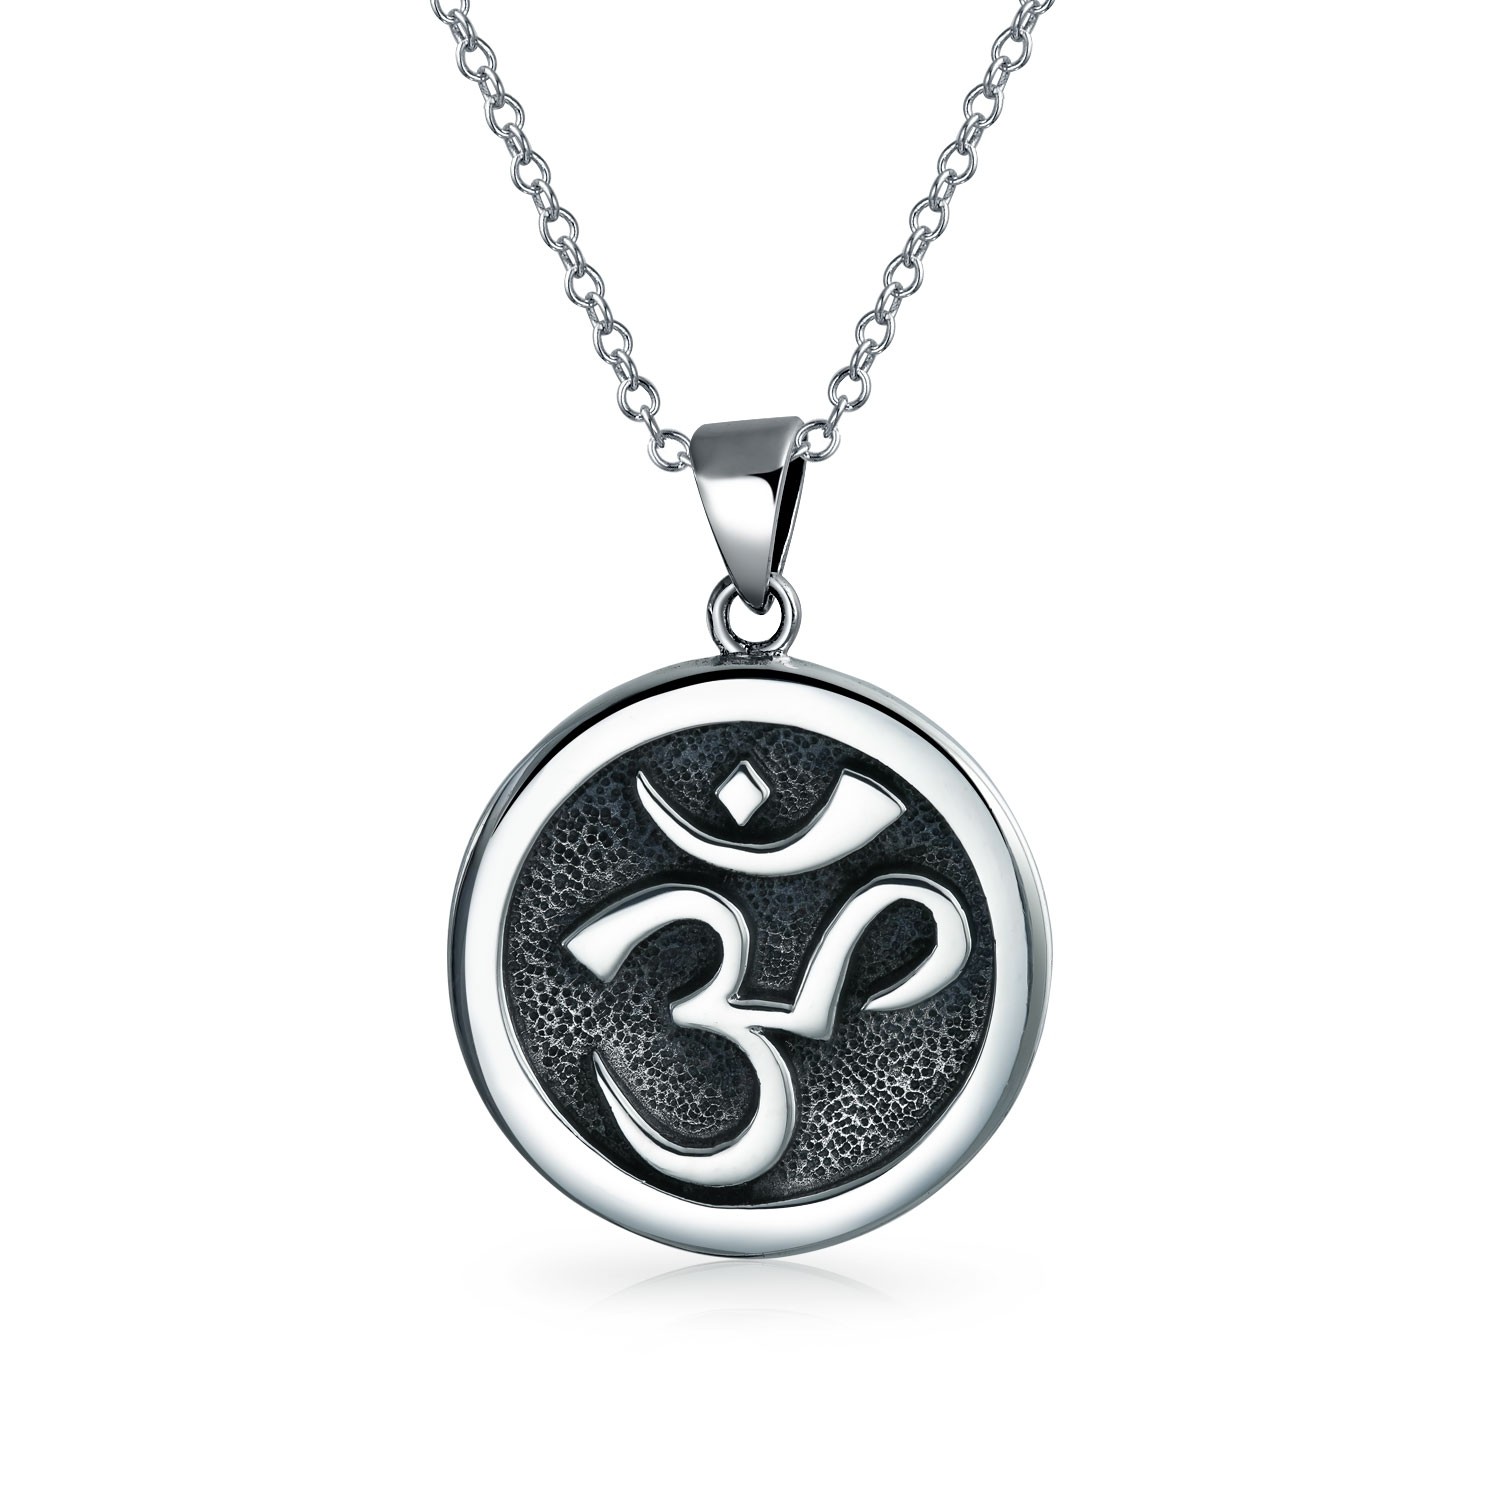 Buy Online Om Jewelry At Wholesale Price